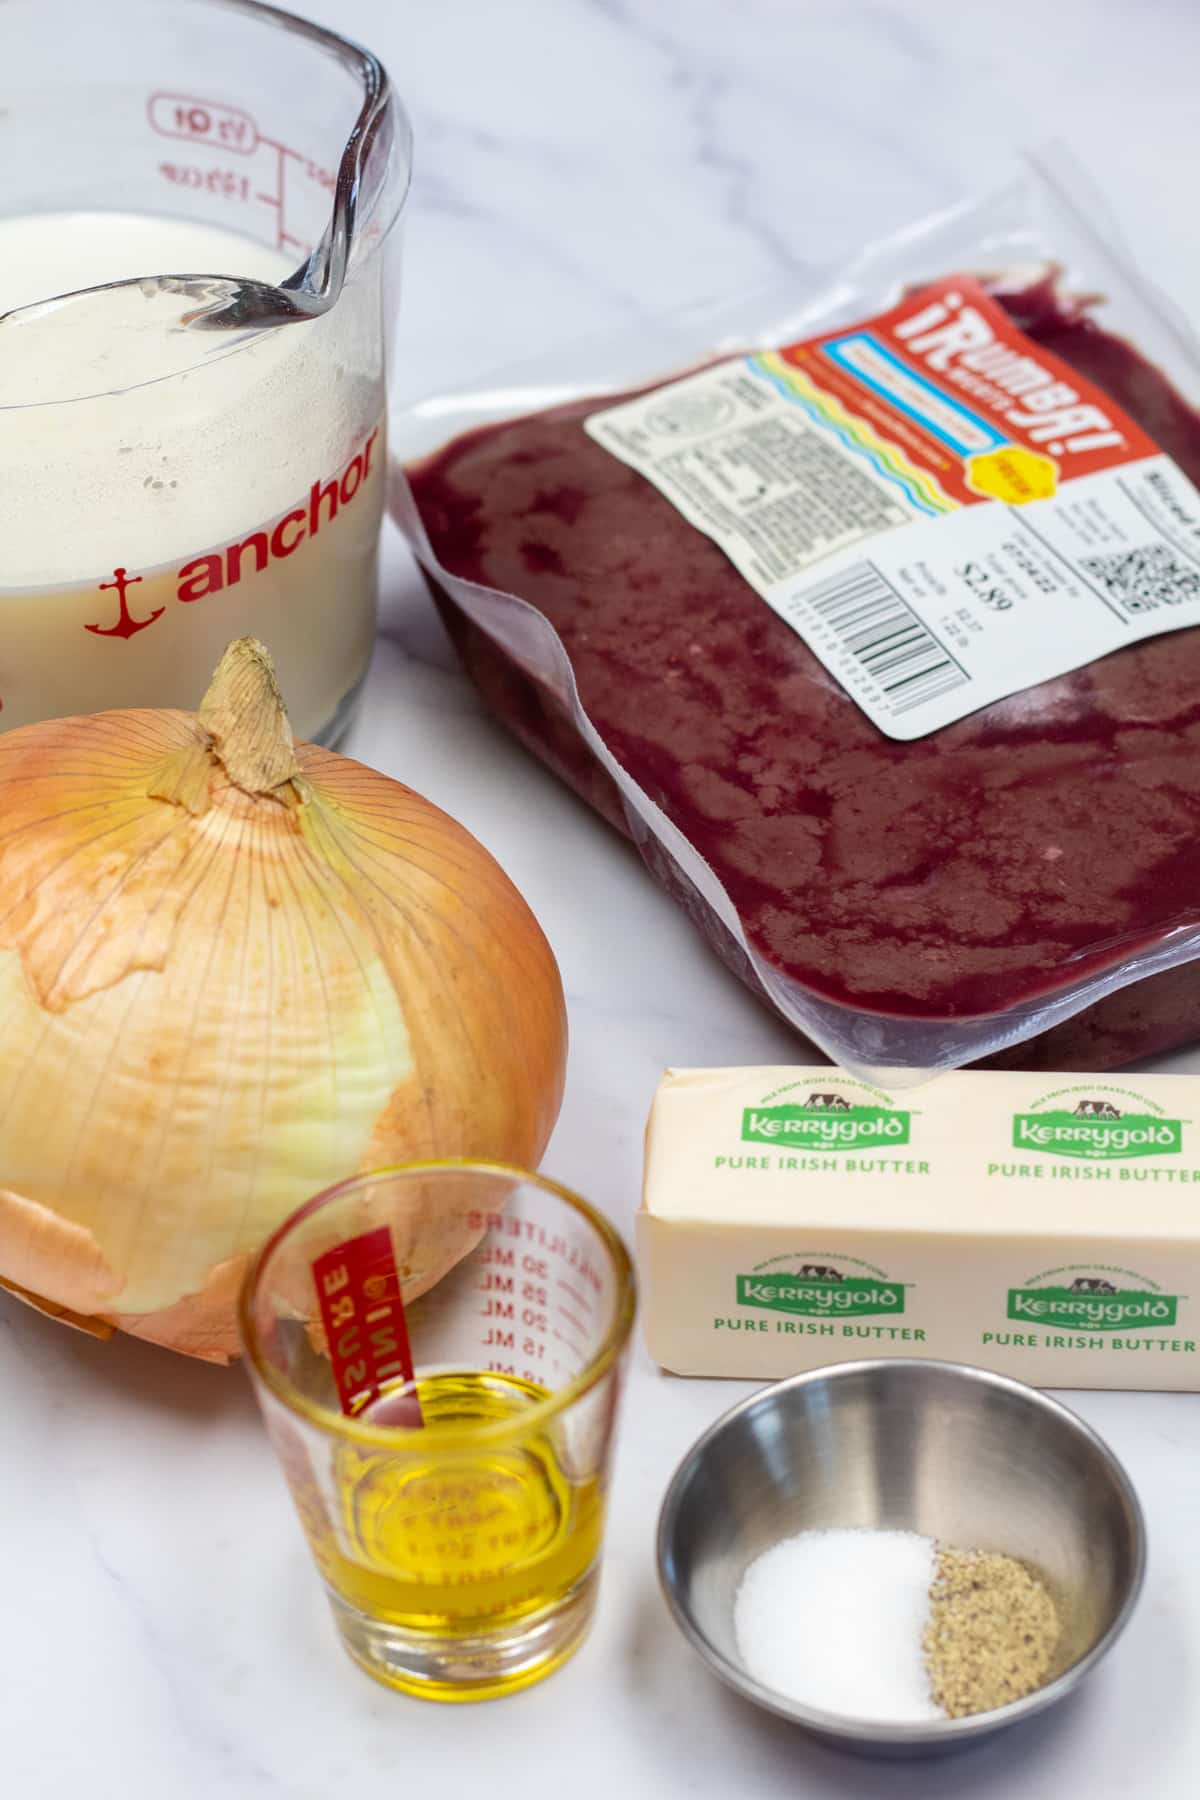 Tall image showing ingredients needed for beef liver and onions.